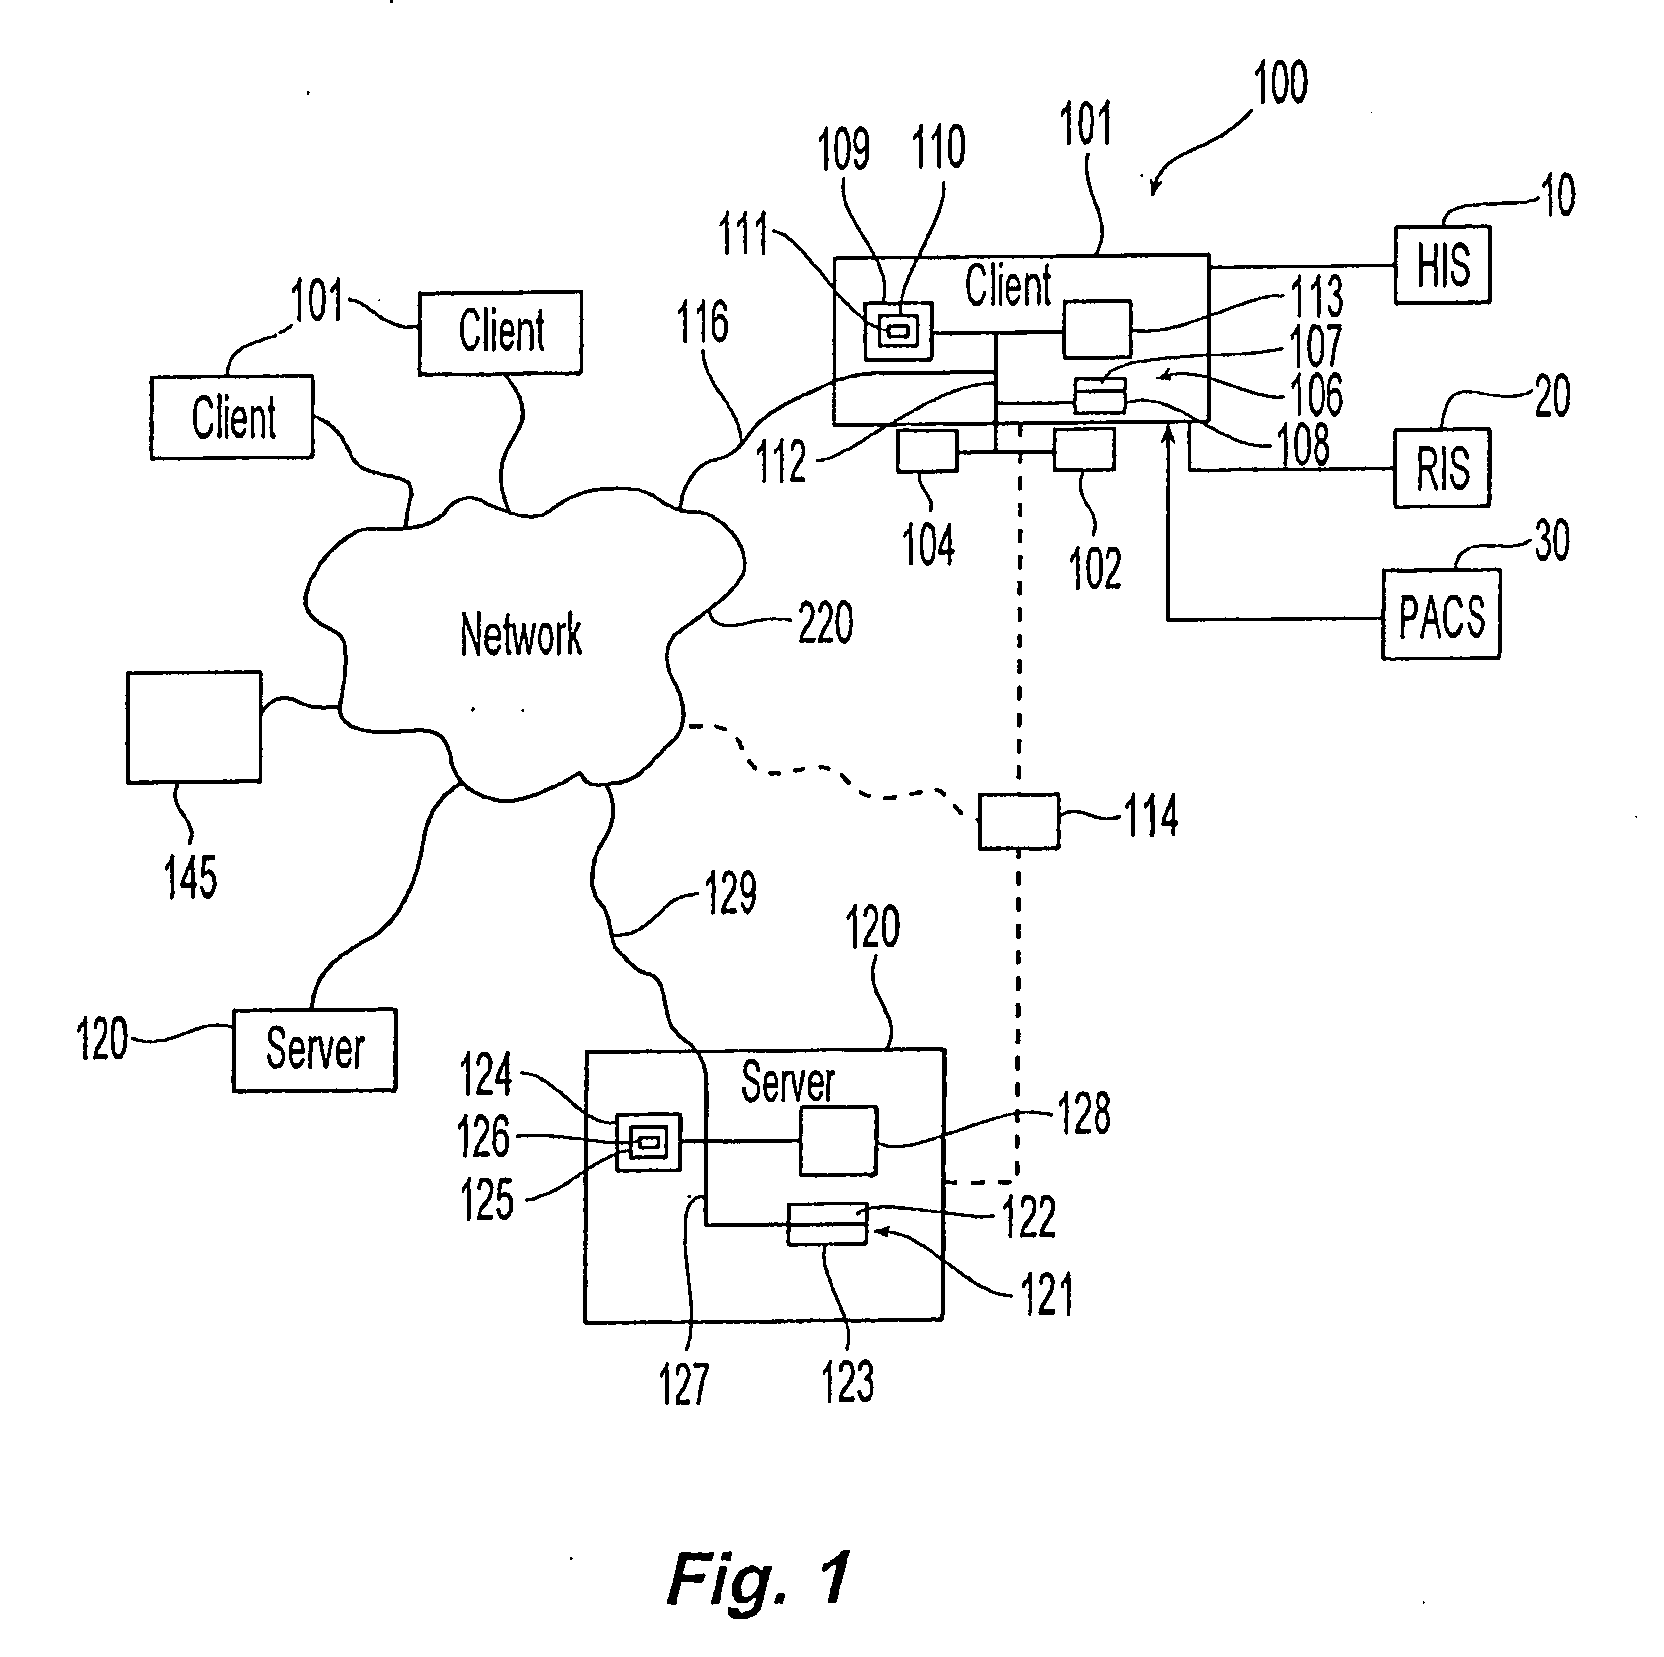 Method and apparatus for adapting computer-based systems to end-user profiles